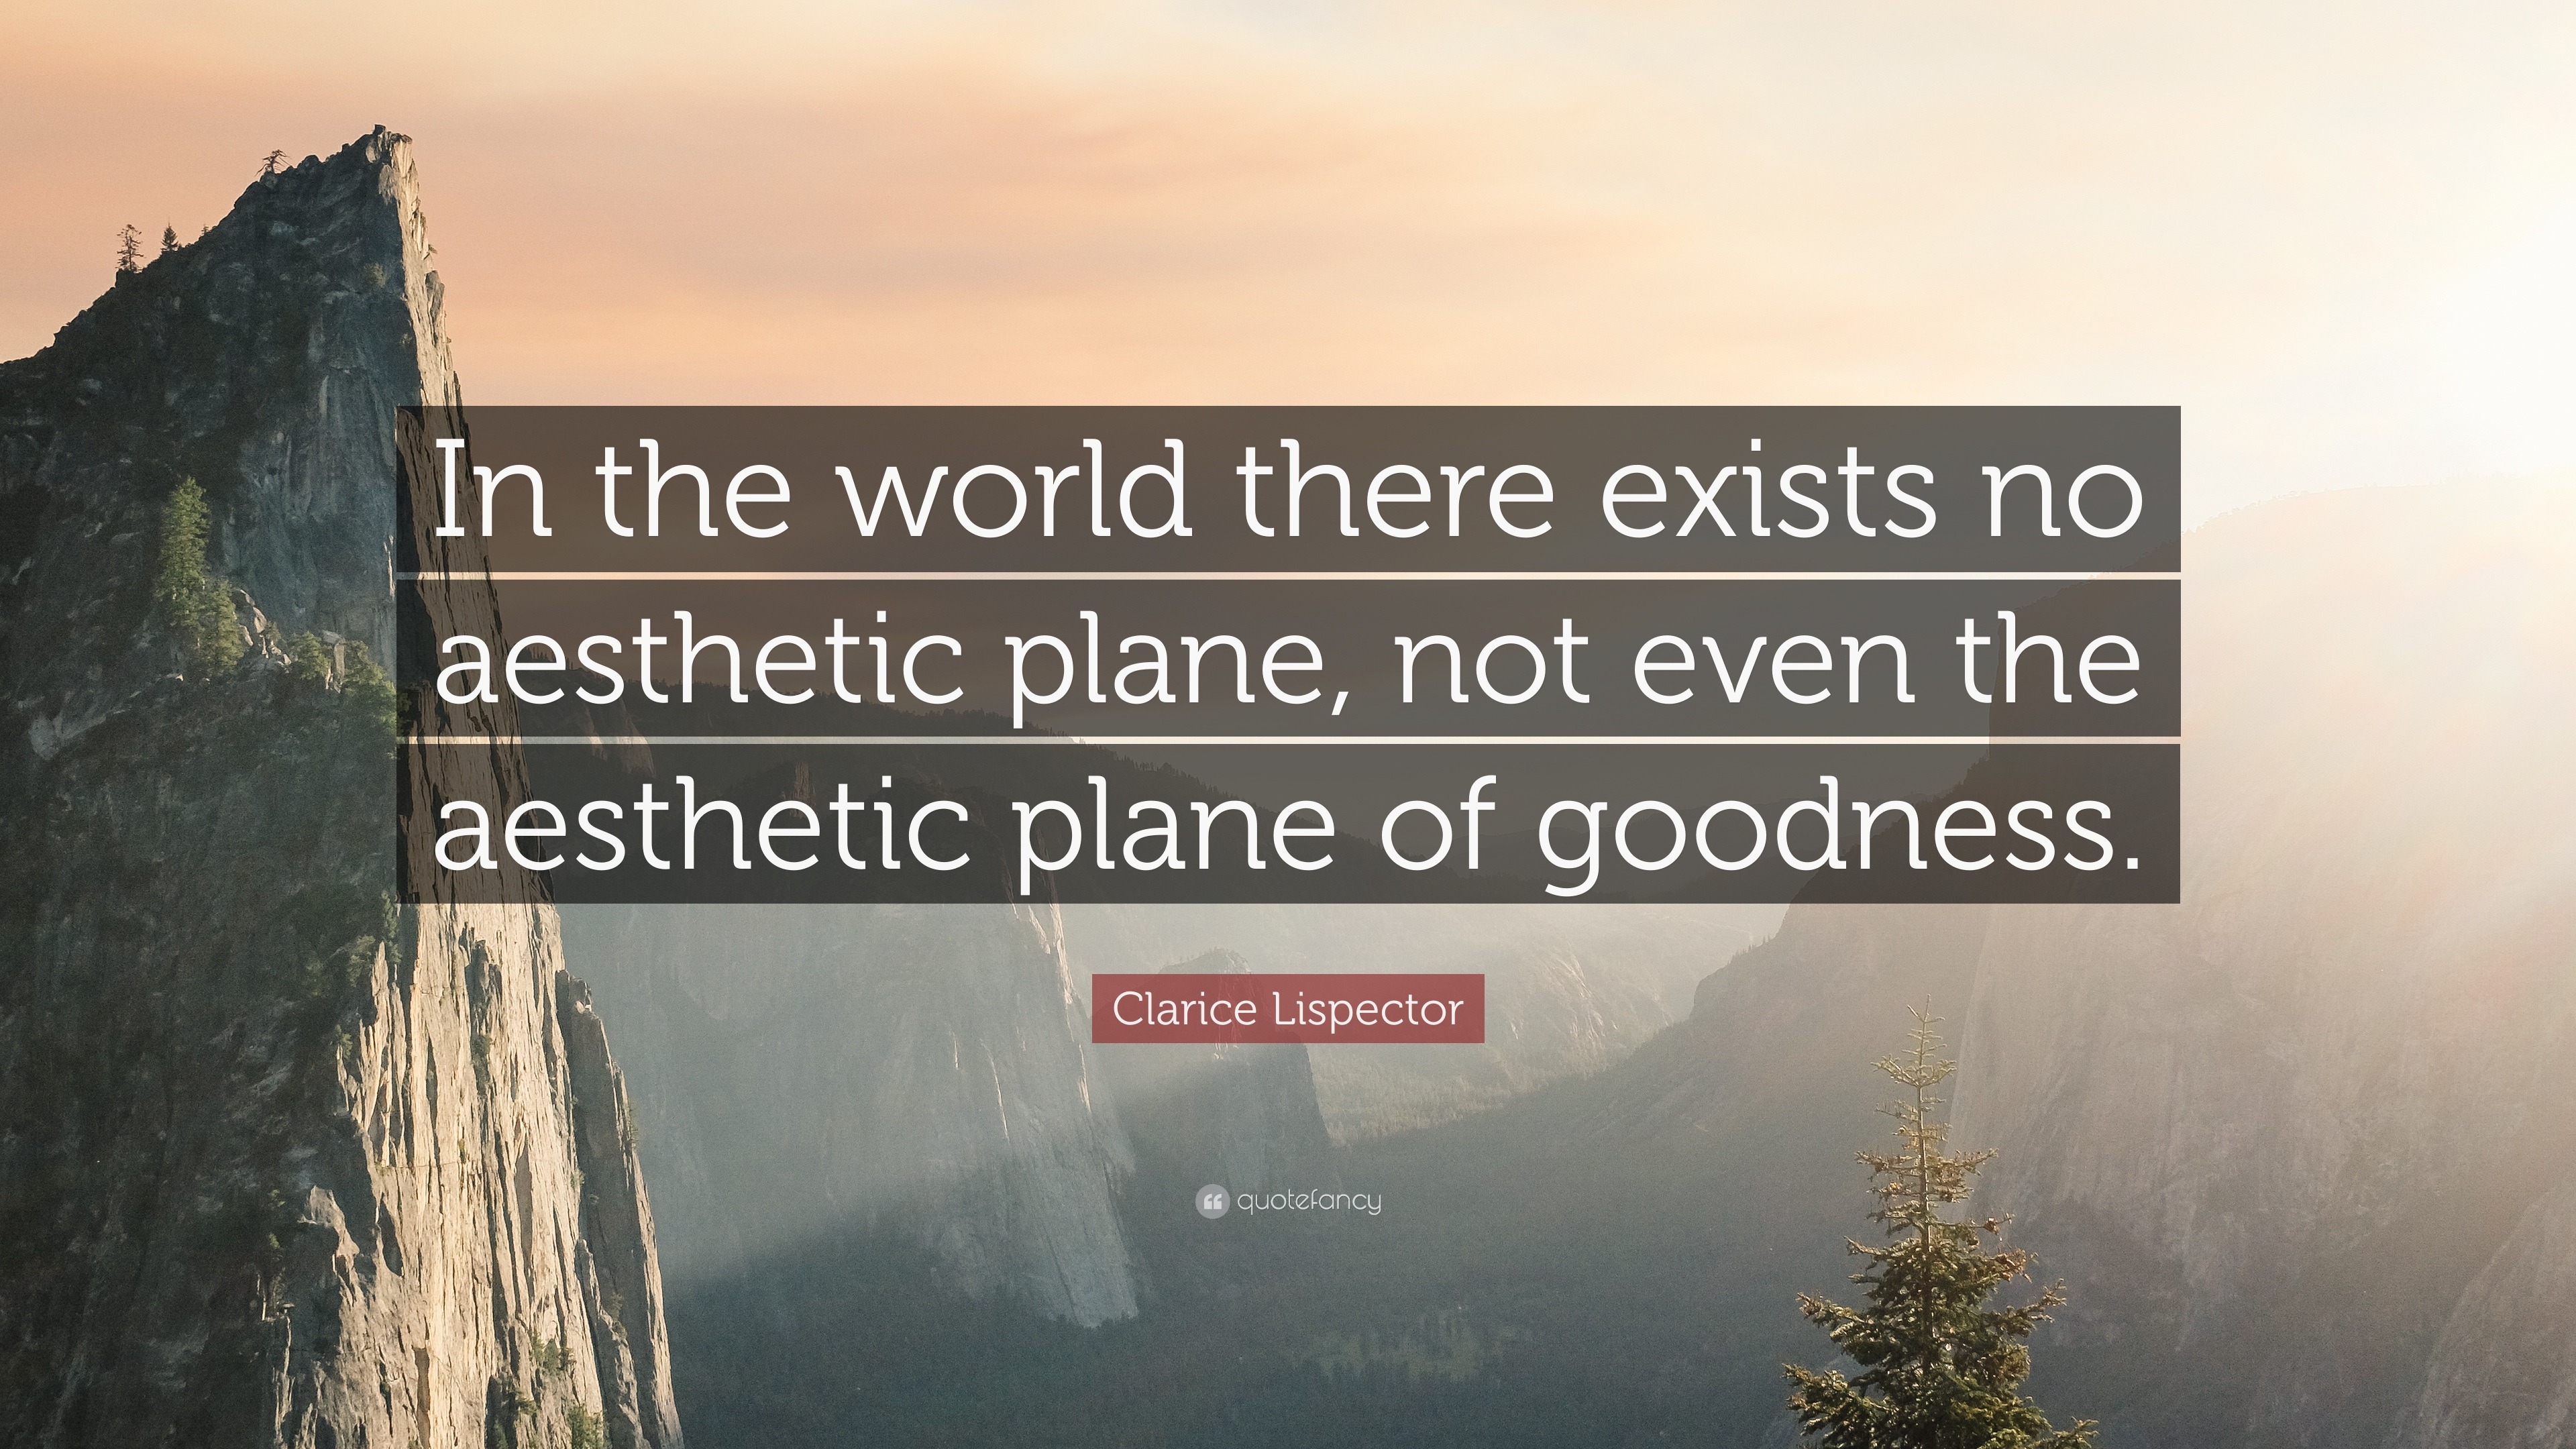 Clarice Lispector Quote In The World There Exists No Aesthetic Plane Not Even The Aesthetic Plane Of Goodness 7 Wallpapers Quotefancy